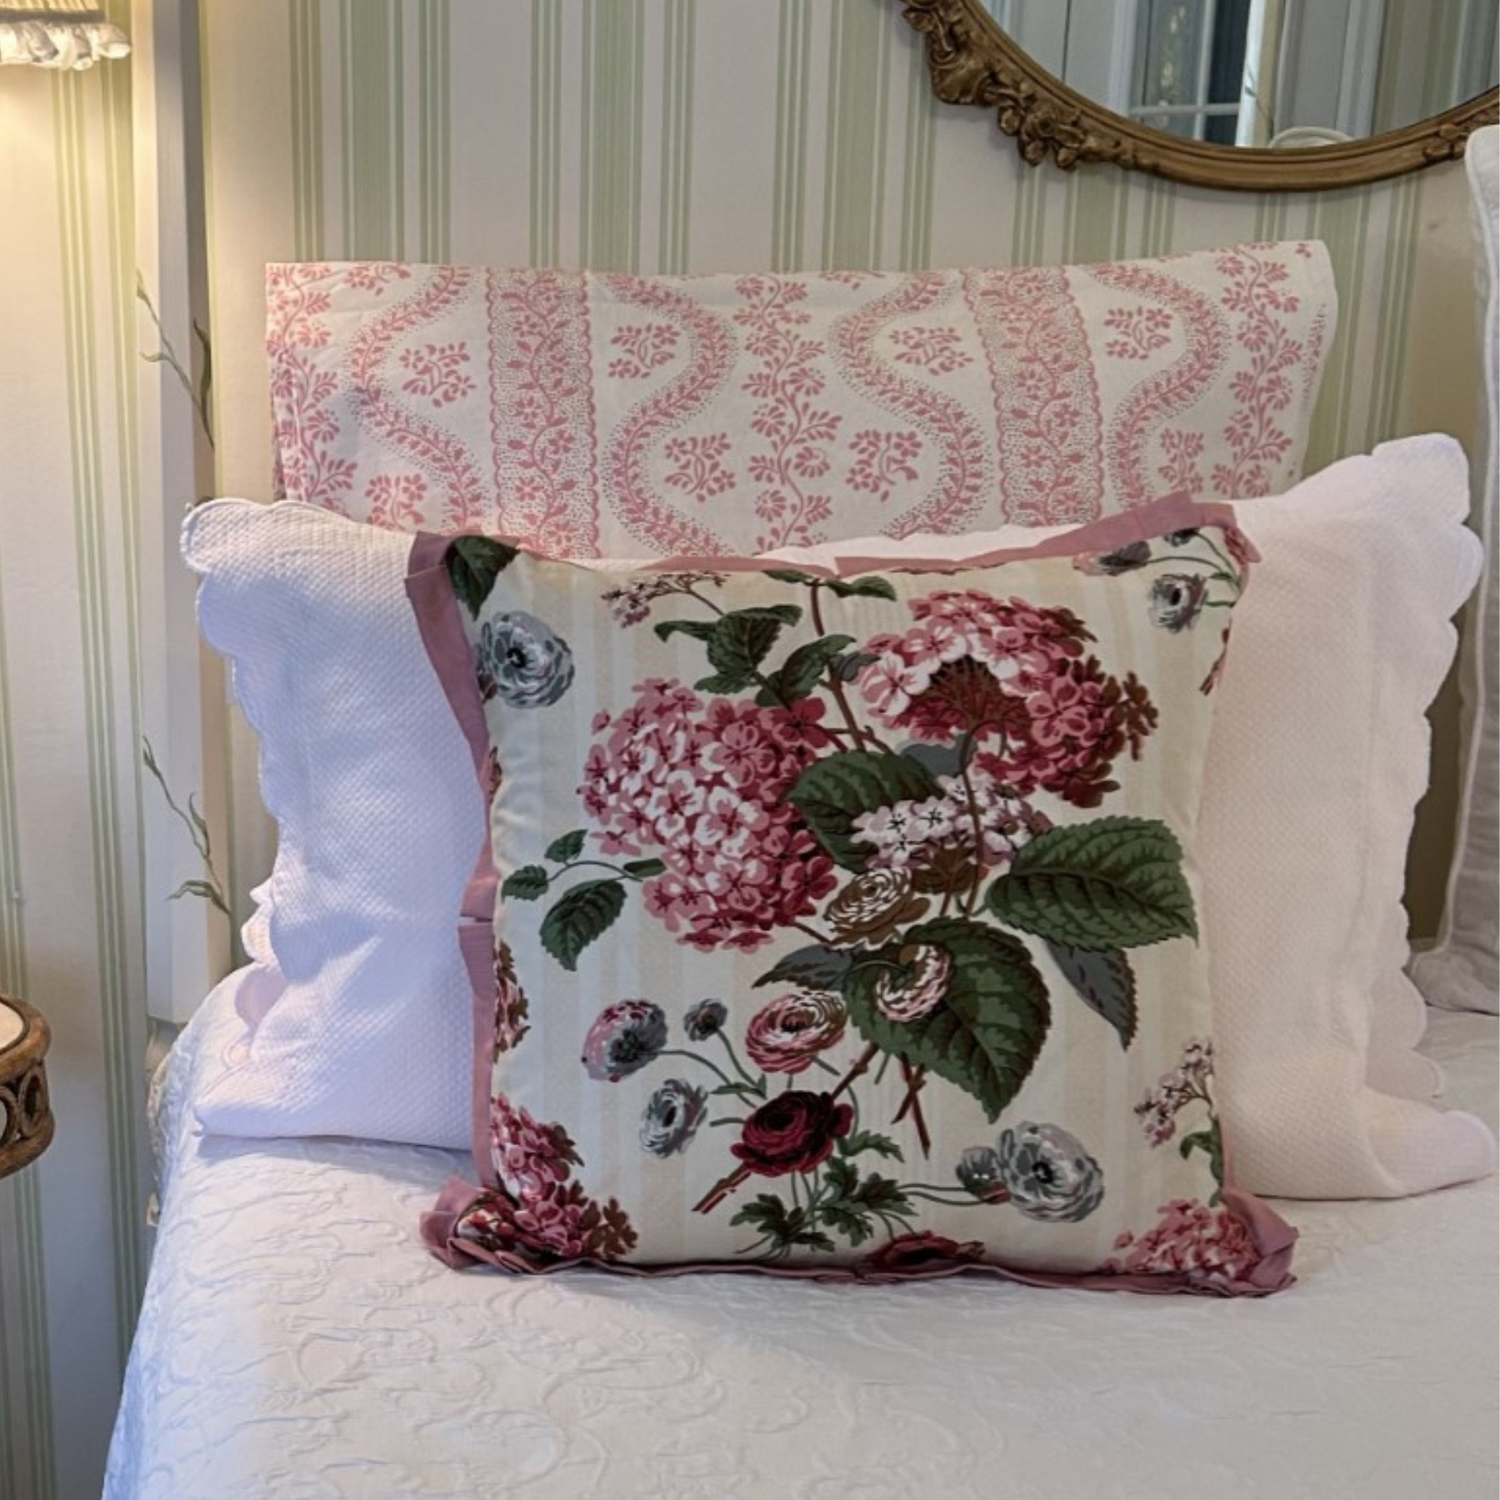 Colefax Pink Hydrangea 18 x 18 Square Decorative Pillow with Down Feather Insert